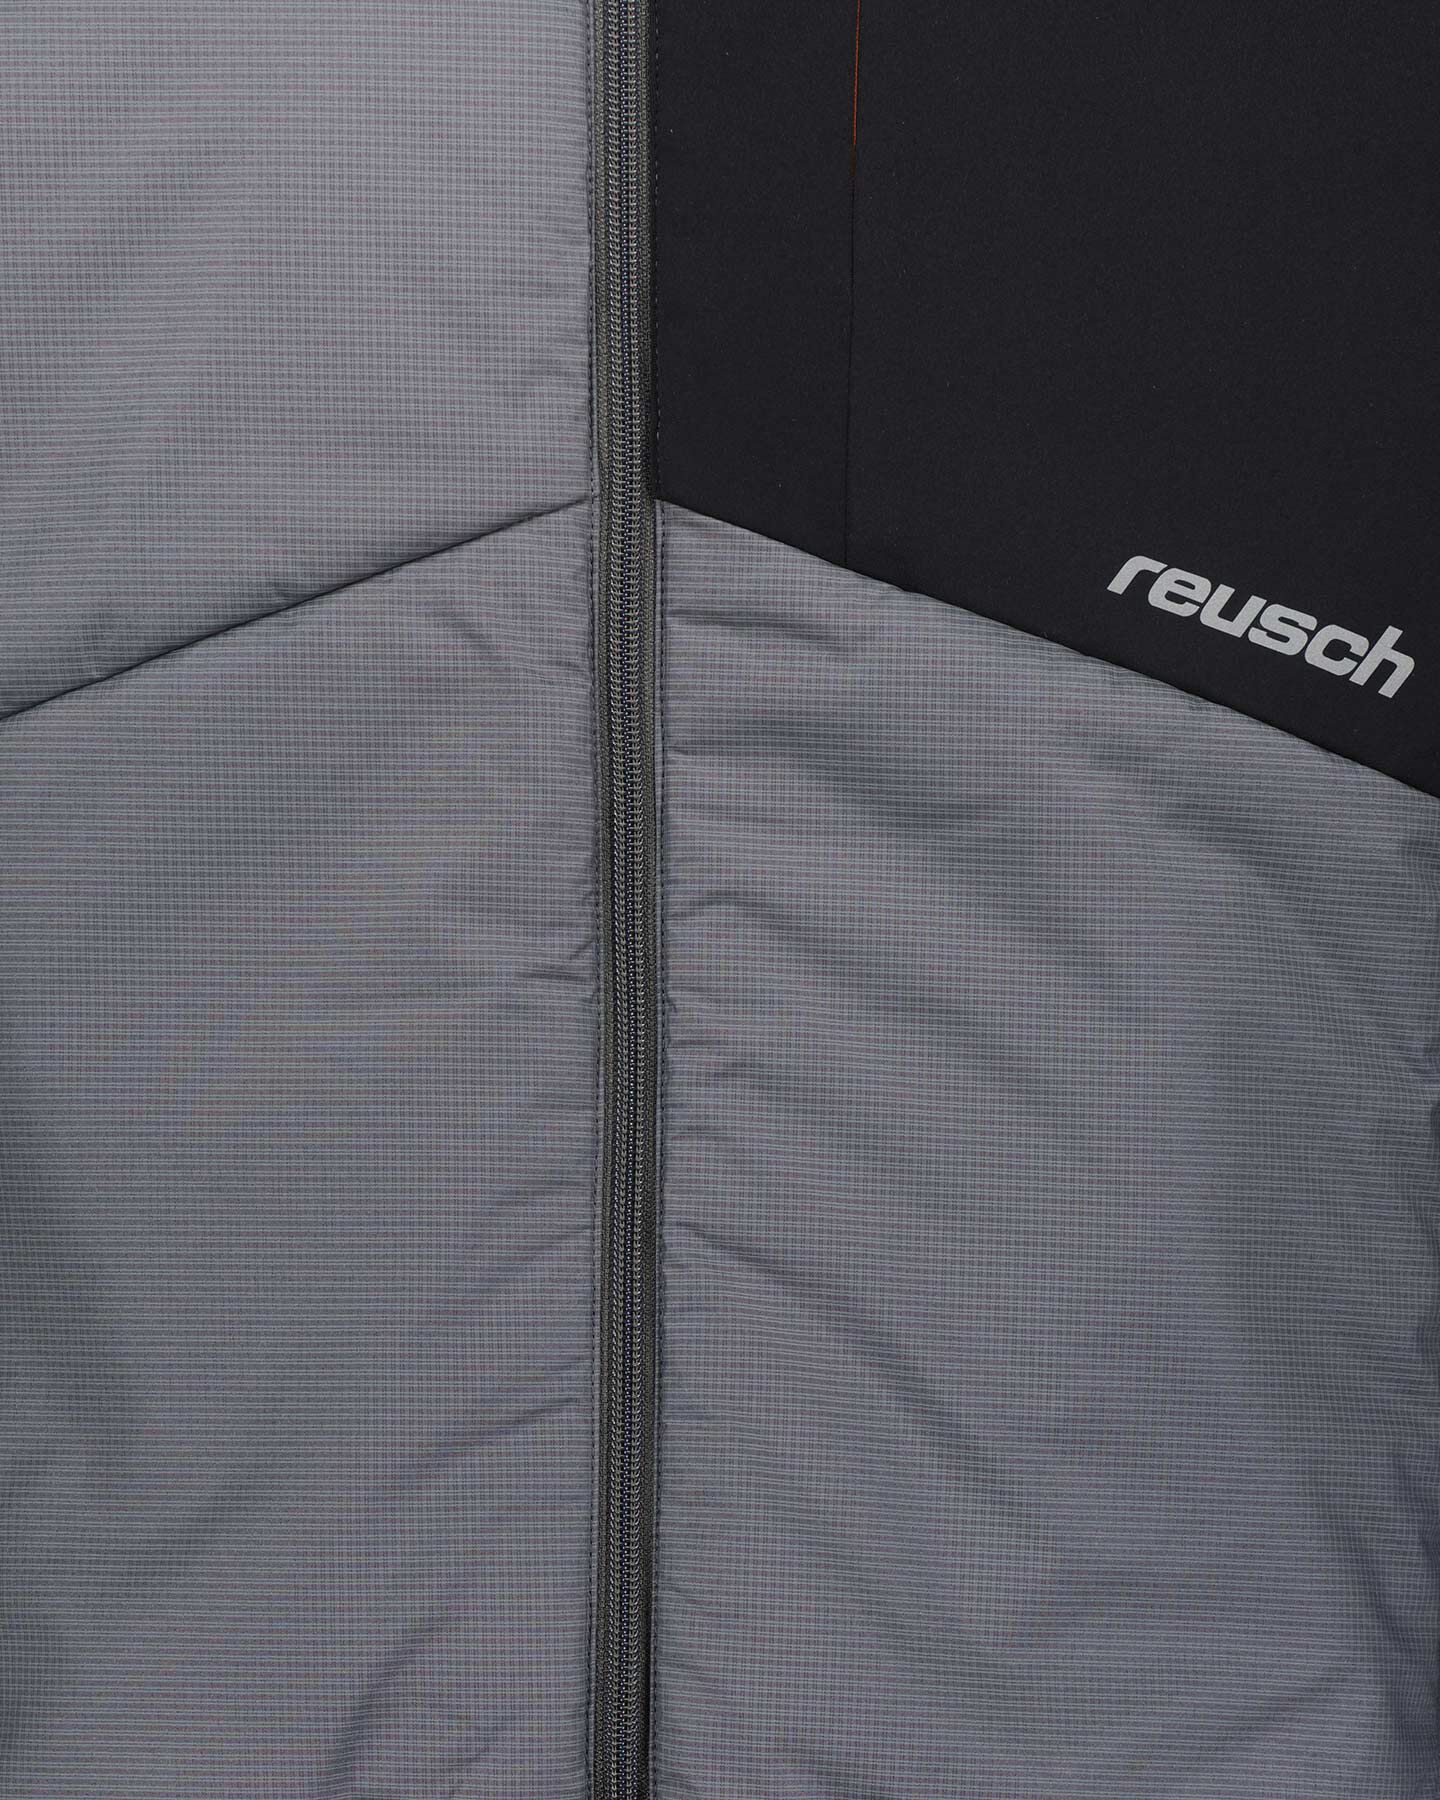  Giacca outdoor REUSCH NUVOLAO M S4127461|910|M scatto 3